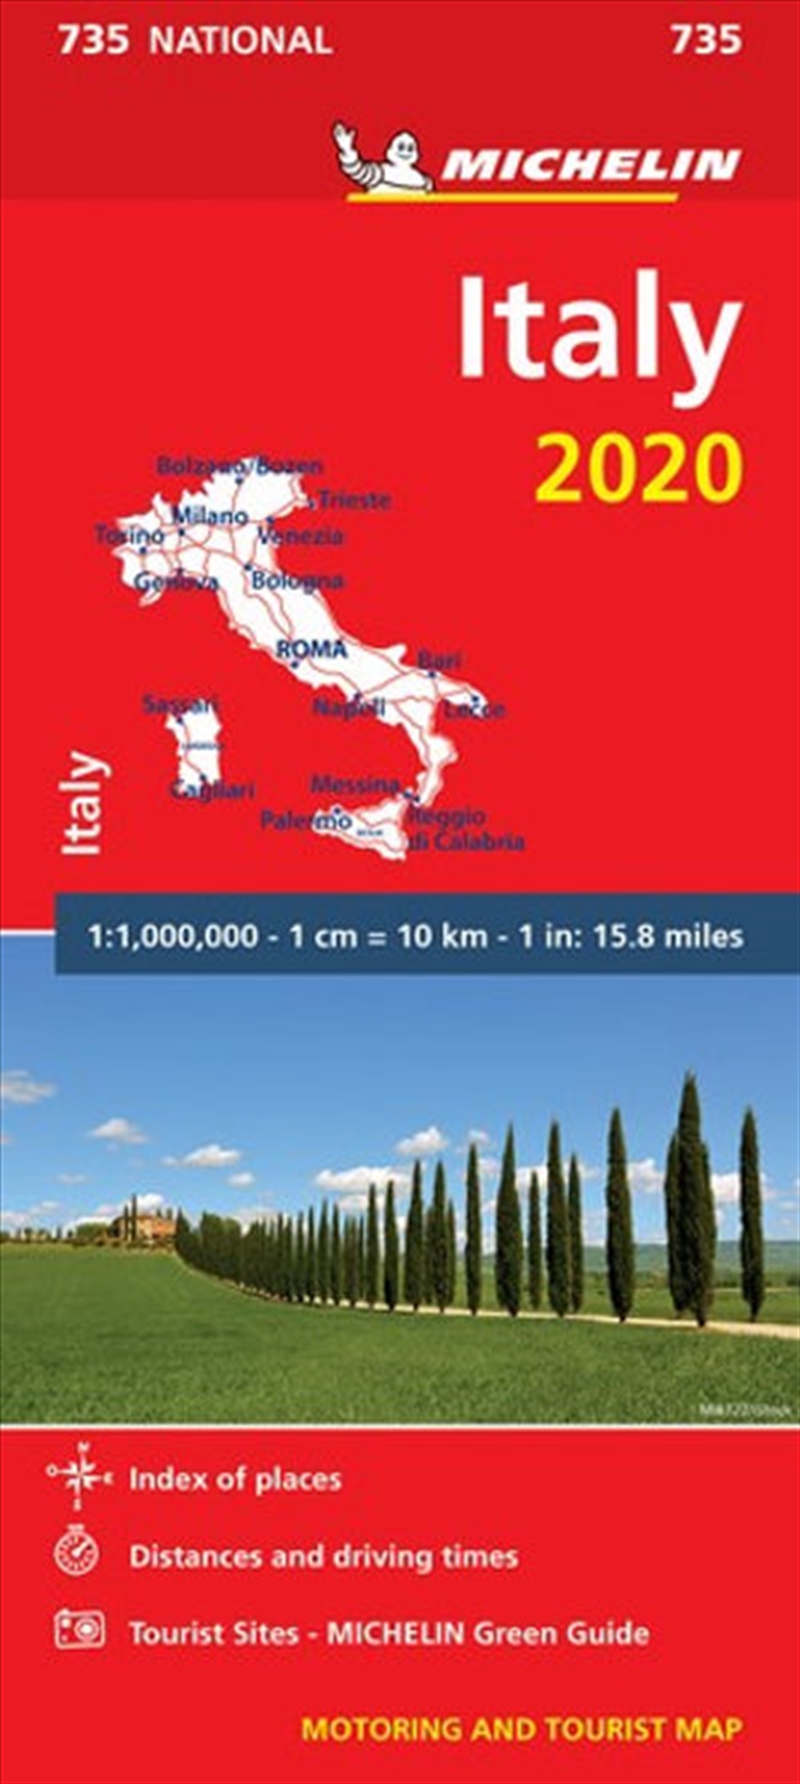 Italy 2020 Michelin National Road Map 735/Product Detail/Recipes, Food & Drink